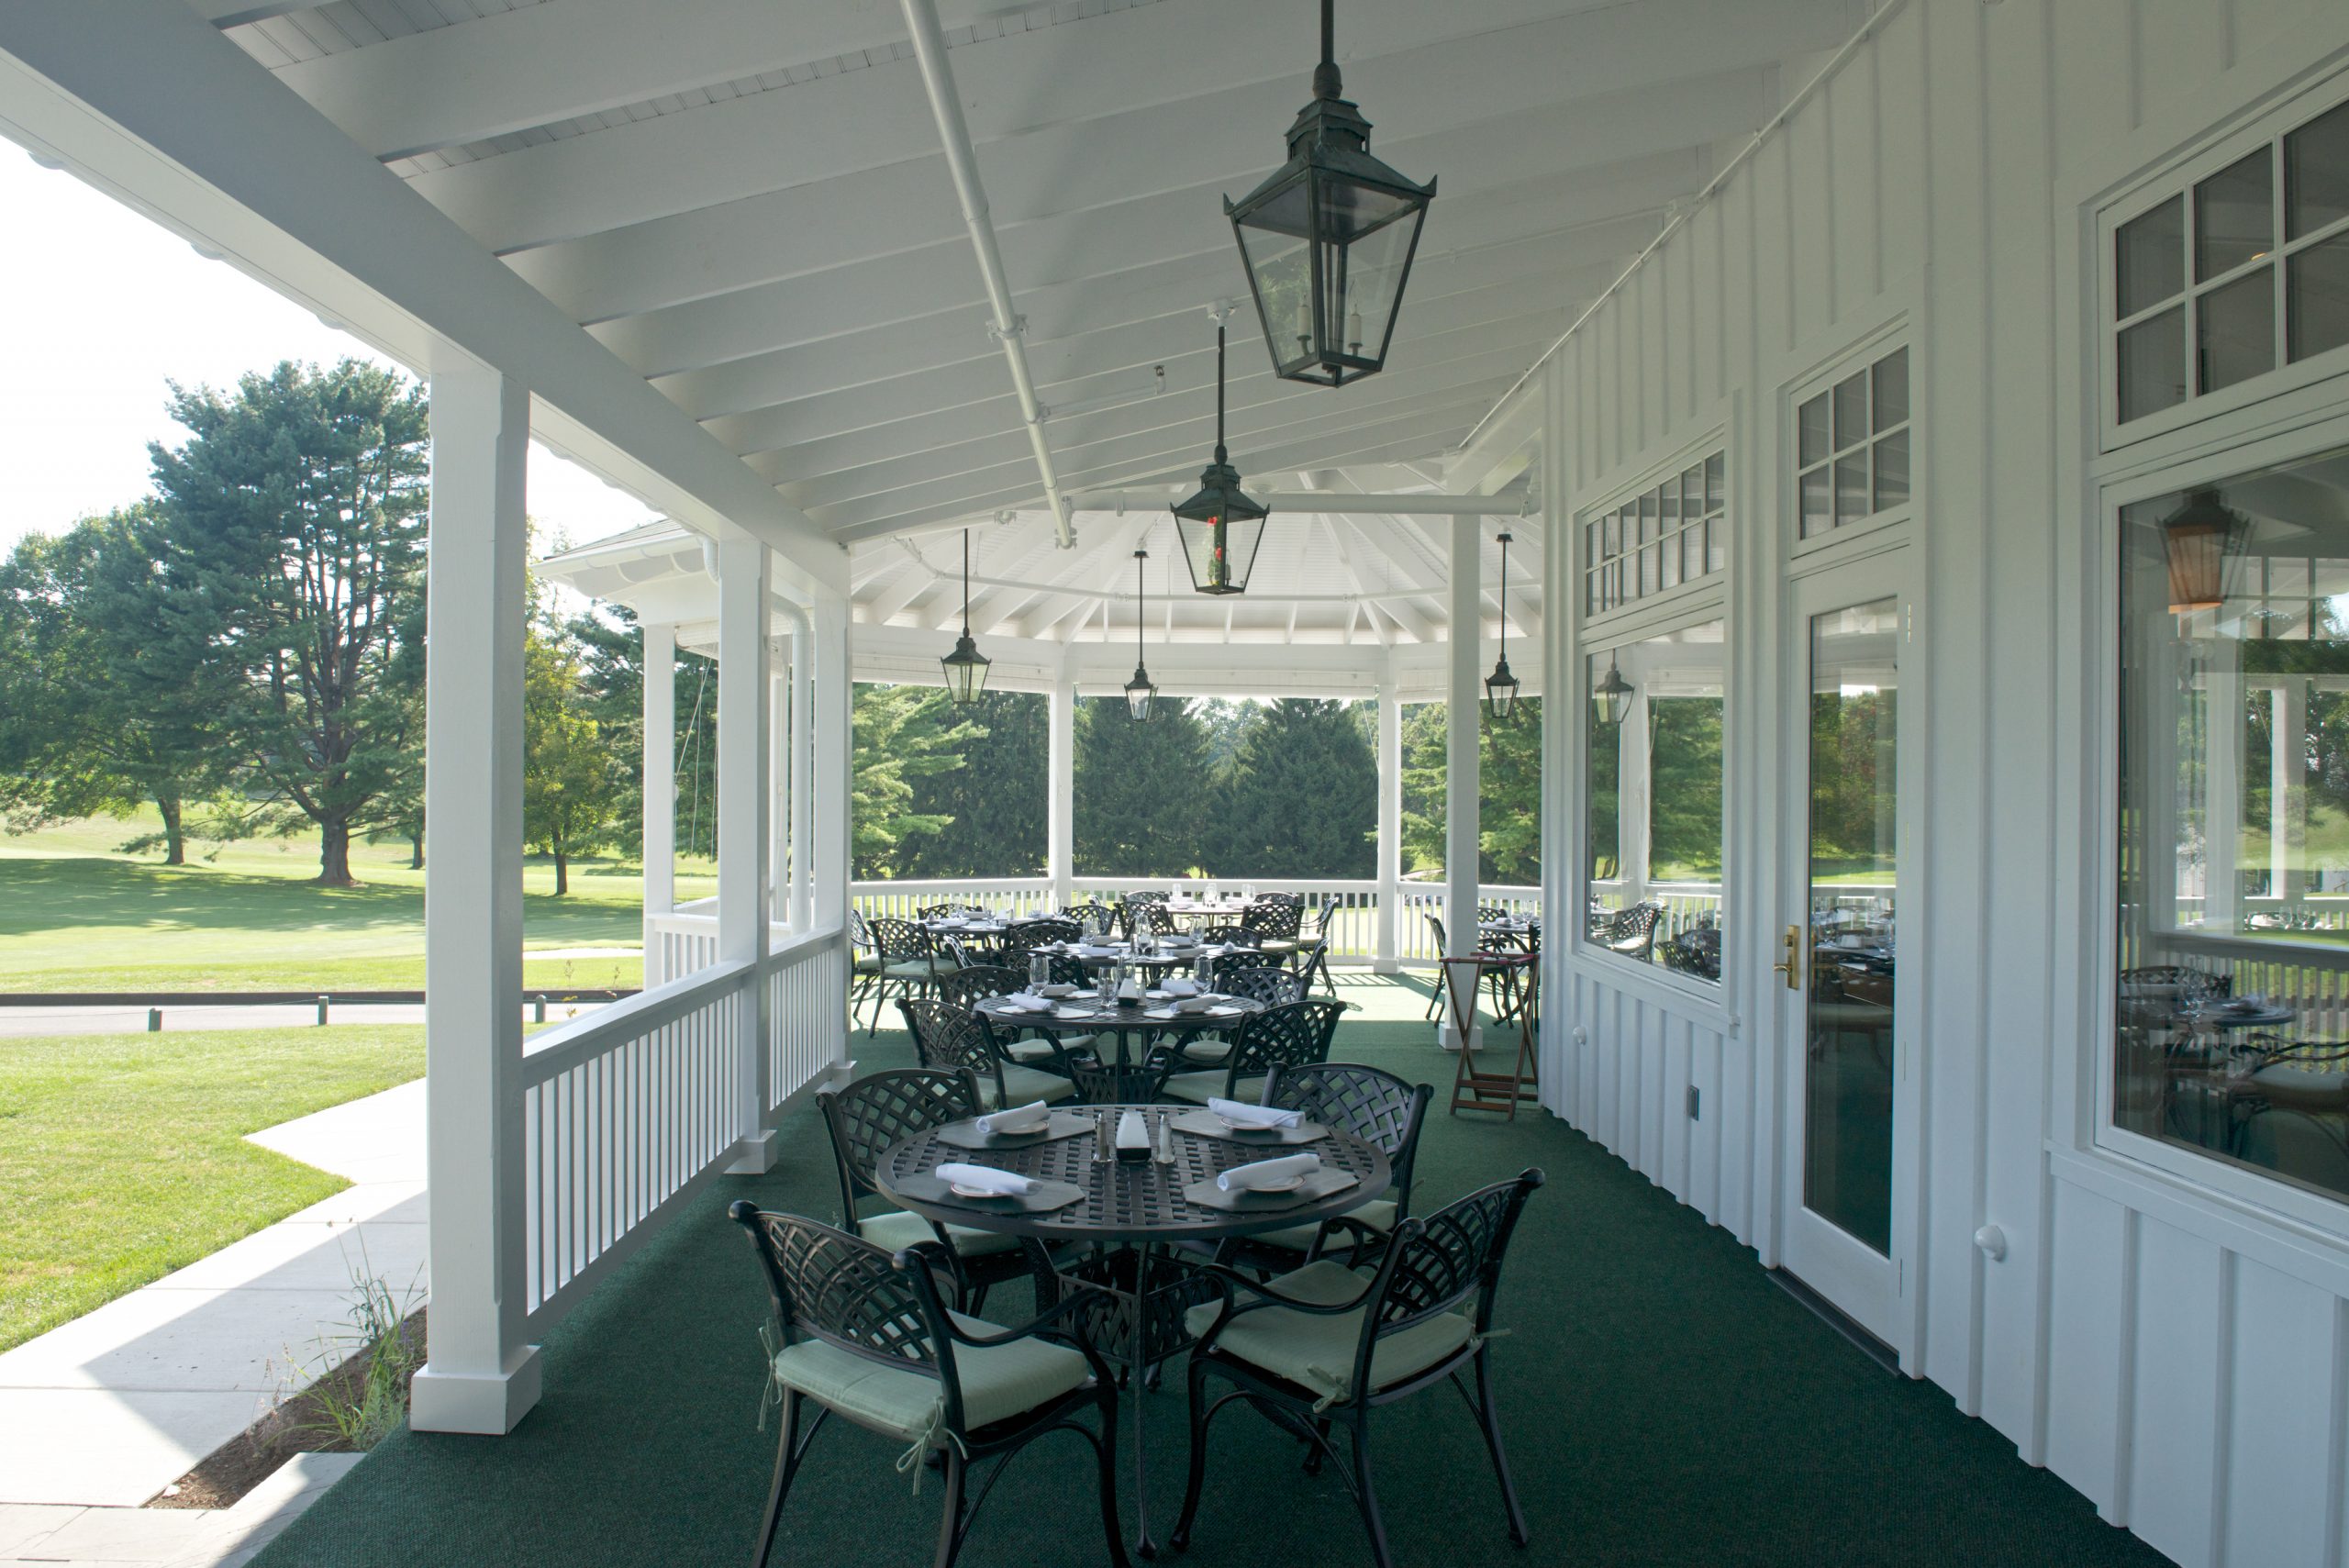 The deck and outdoor seating area at Elkridge Country Club in Baltimore, Maryland renovated by Delbert Adams Construction Group, Commercial Construction division.